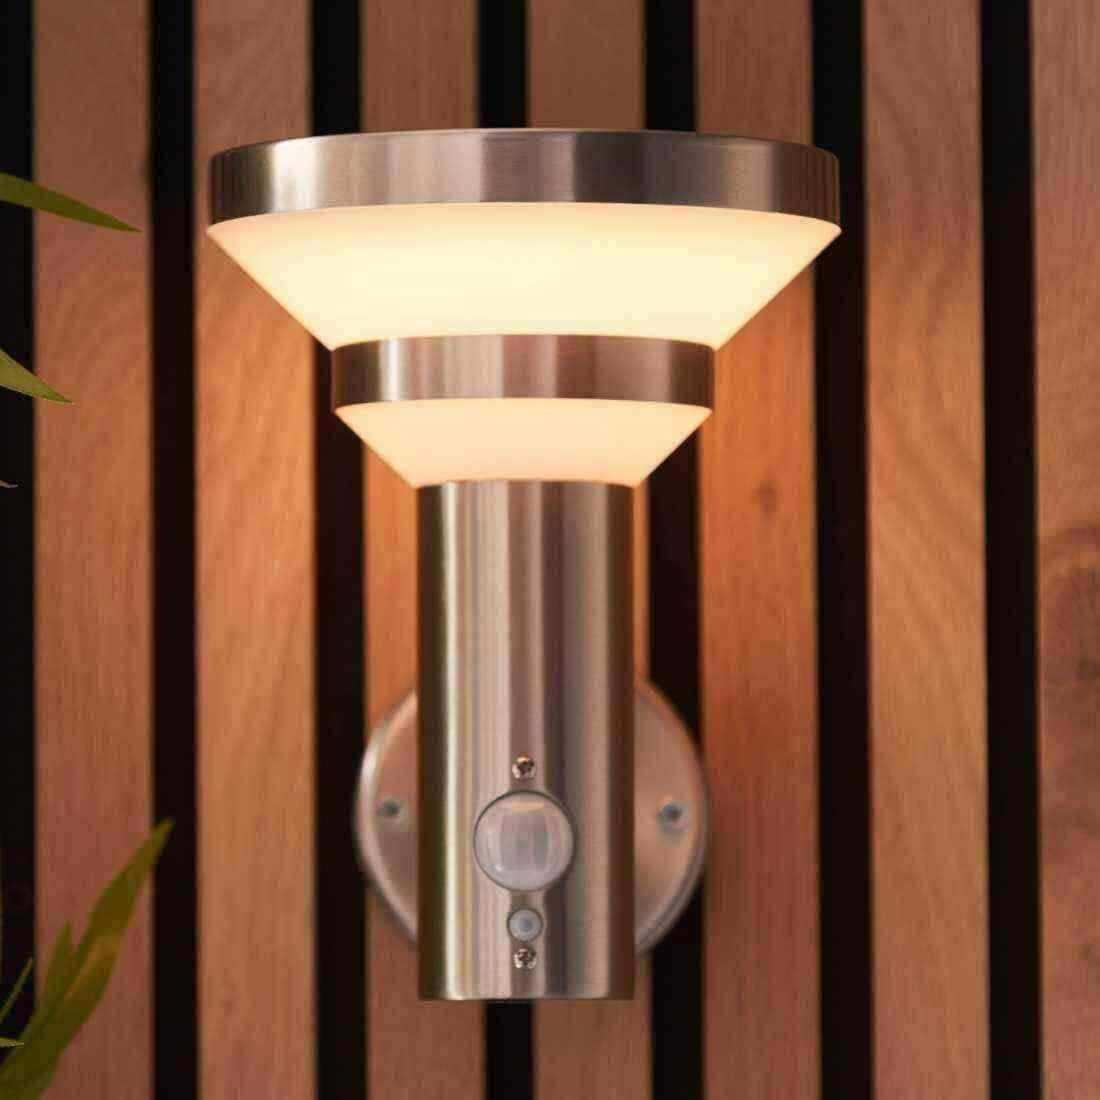 Brushed Stainless Steel Solar-Powered Exterior wall light - The Farthing